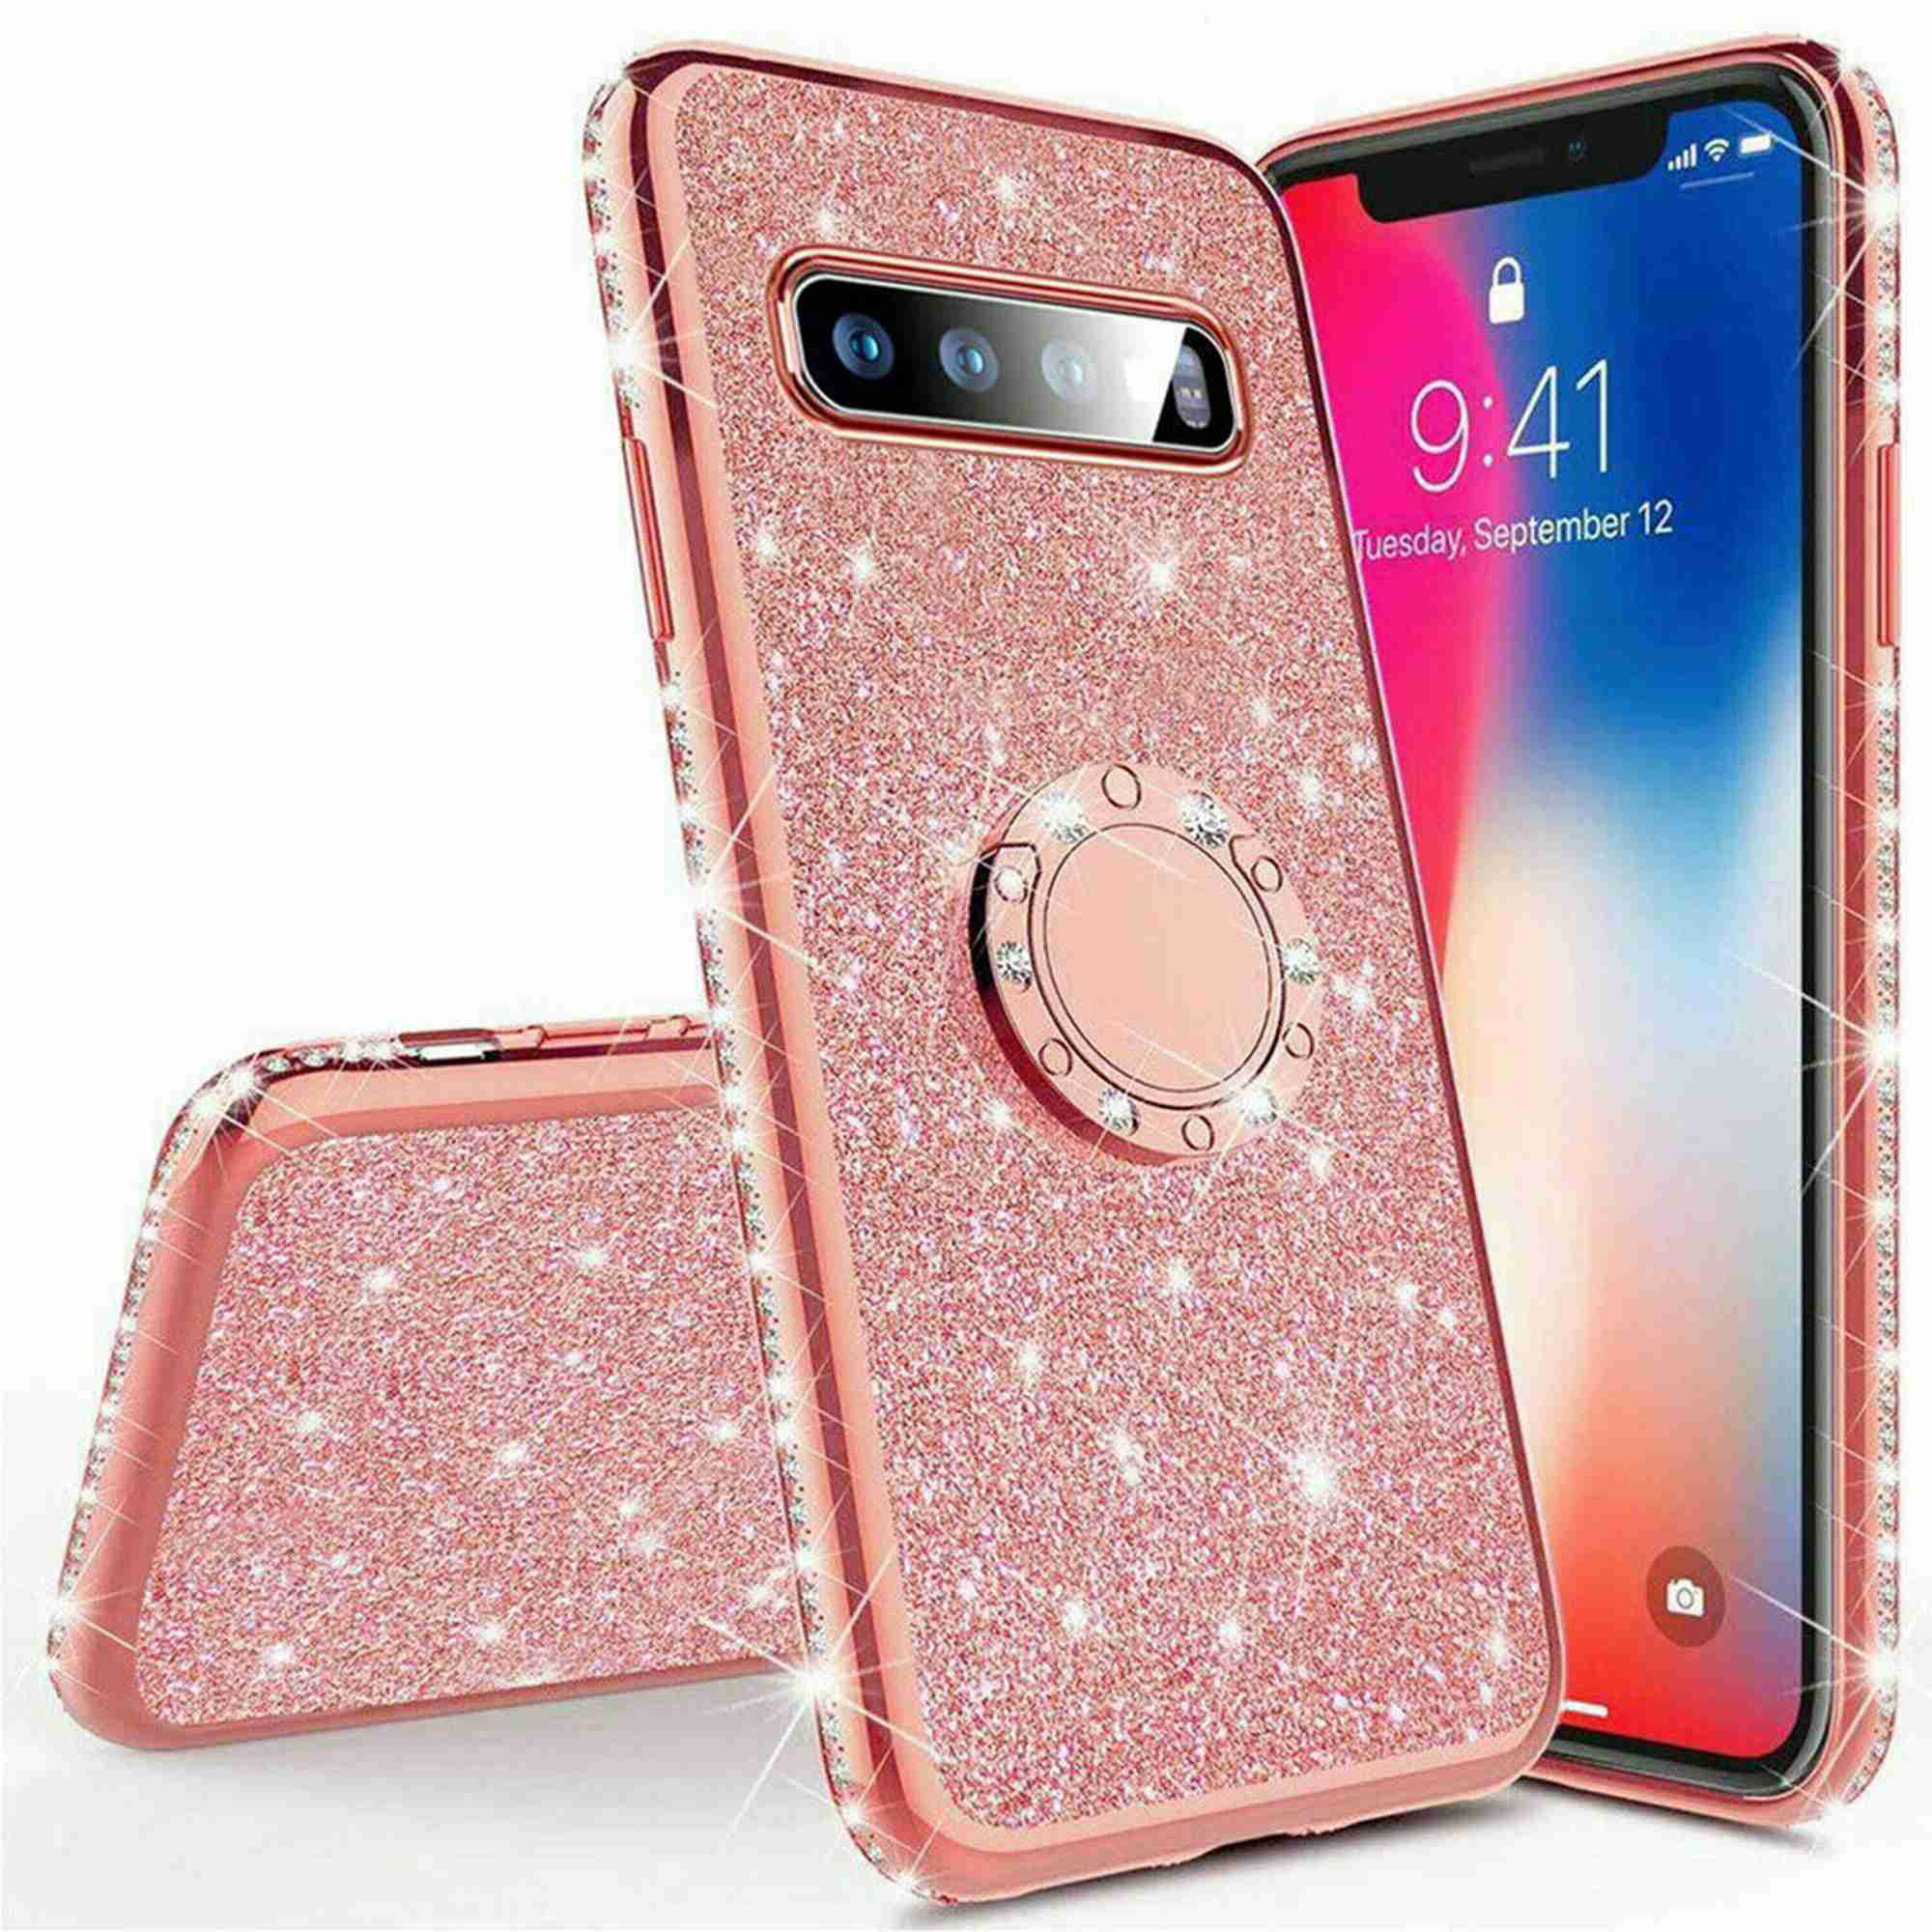 Herbests Compatible with Samsung Galaxy S10 Case Cute Women Girls Mandala Flower Pattern Crystal Clear TPU Transparent Scratch Resistant Protective Back Cover,Blue Mandala Flower